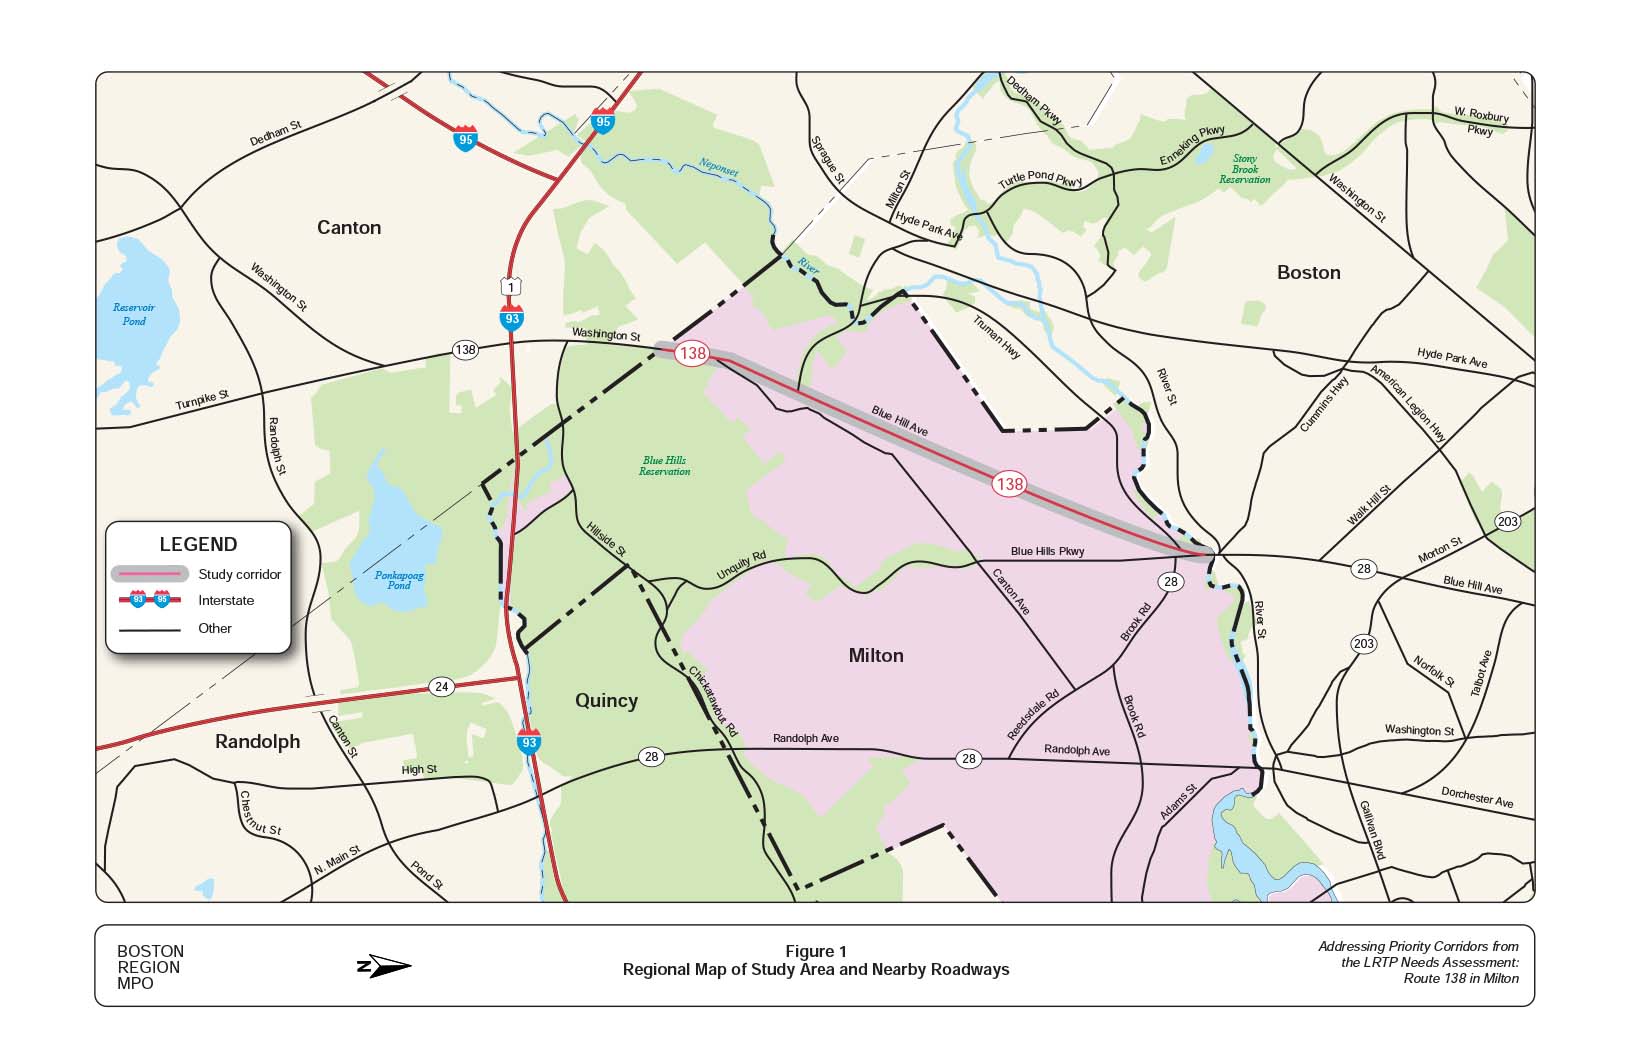 Figure 1 is a map of the study area, Route 138 in Milton and surrounding roadways.